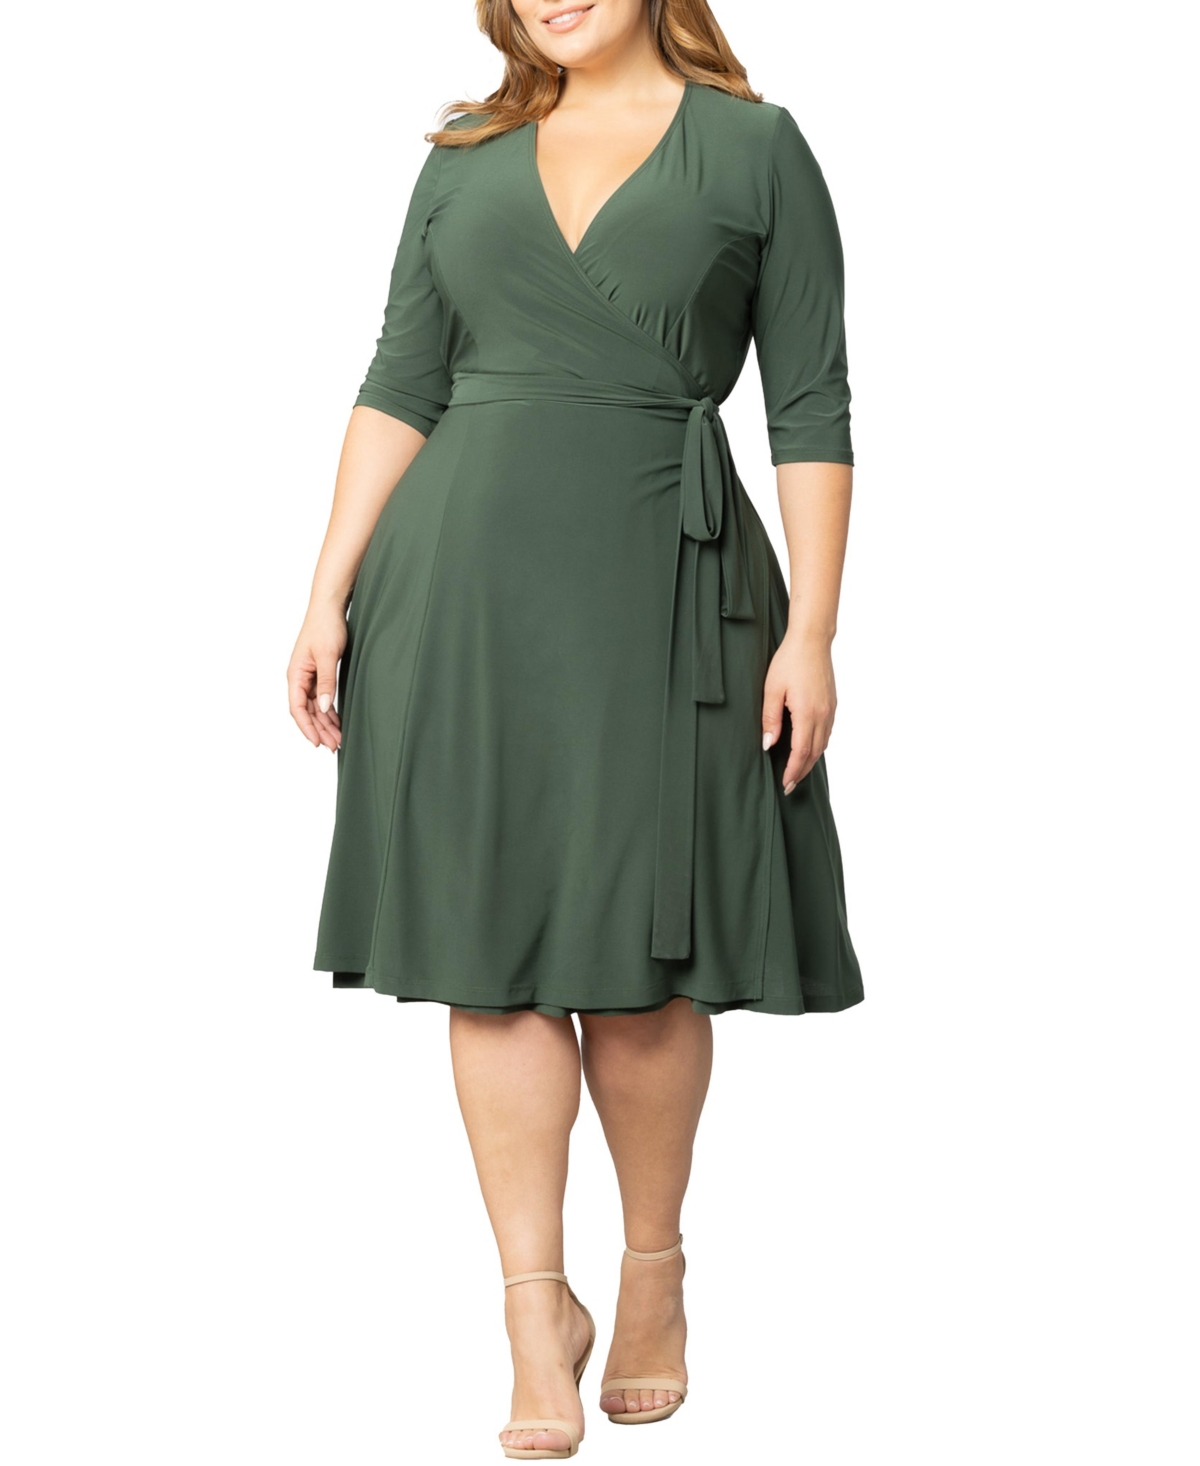 Plus Size Essential Wrap Dress with 3/4 Sleeves - Sapphire